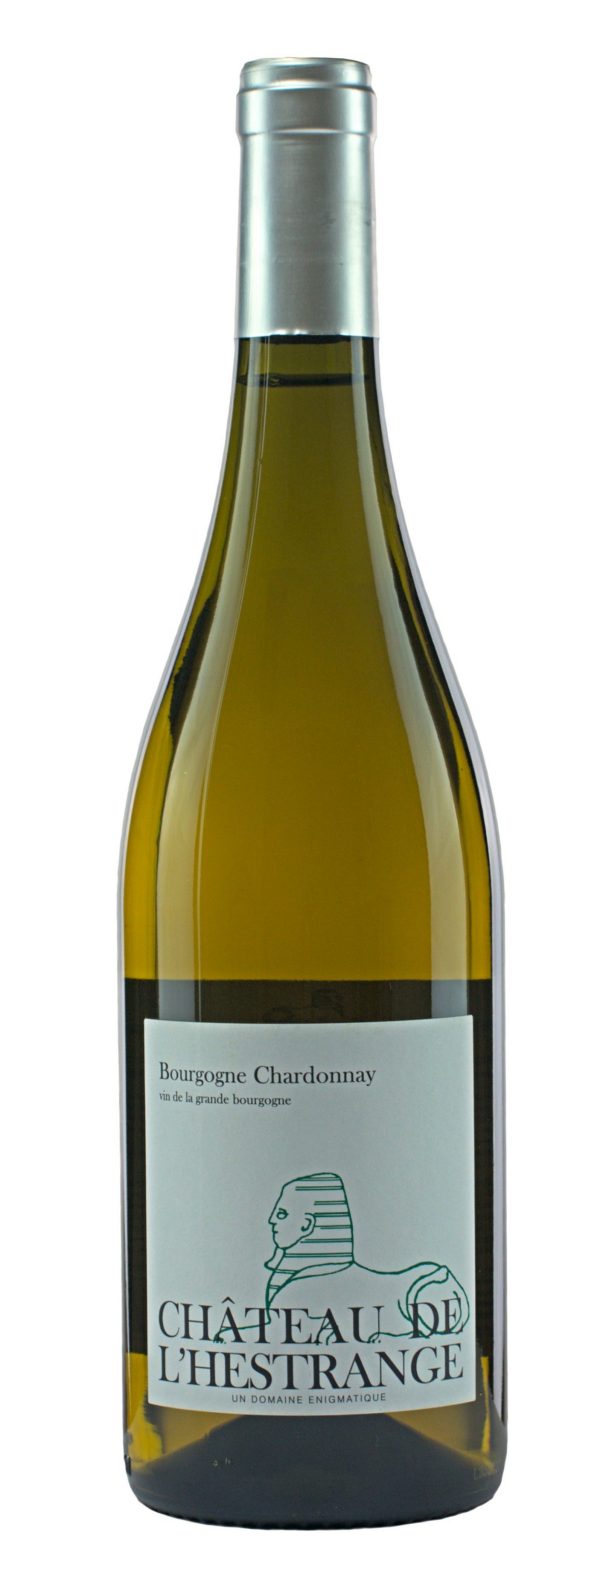 ALL THINGS DRINKS-Chateau de l'Hestrange-french chardonnay-front label